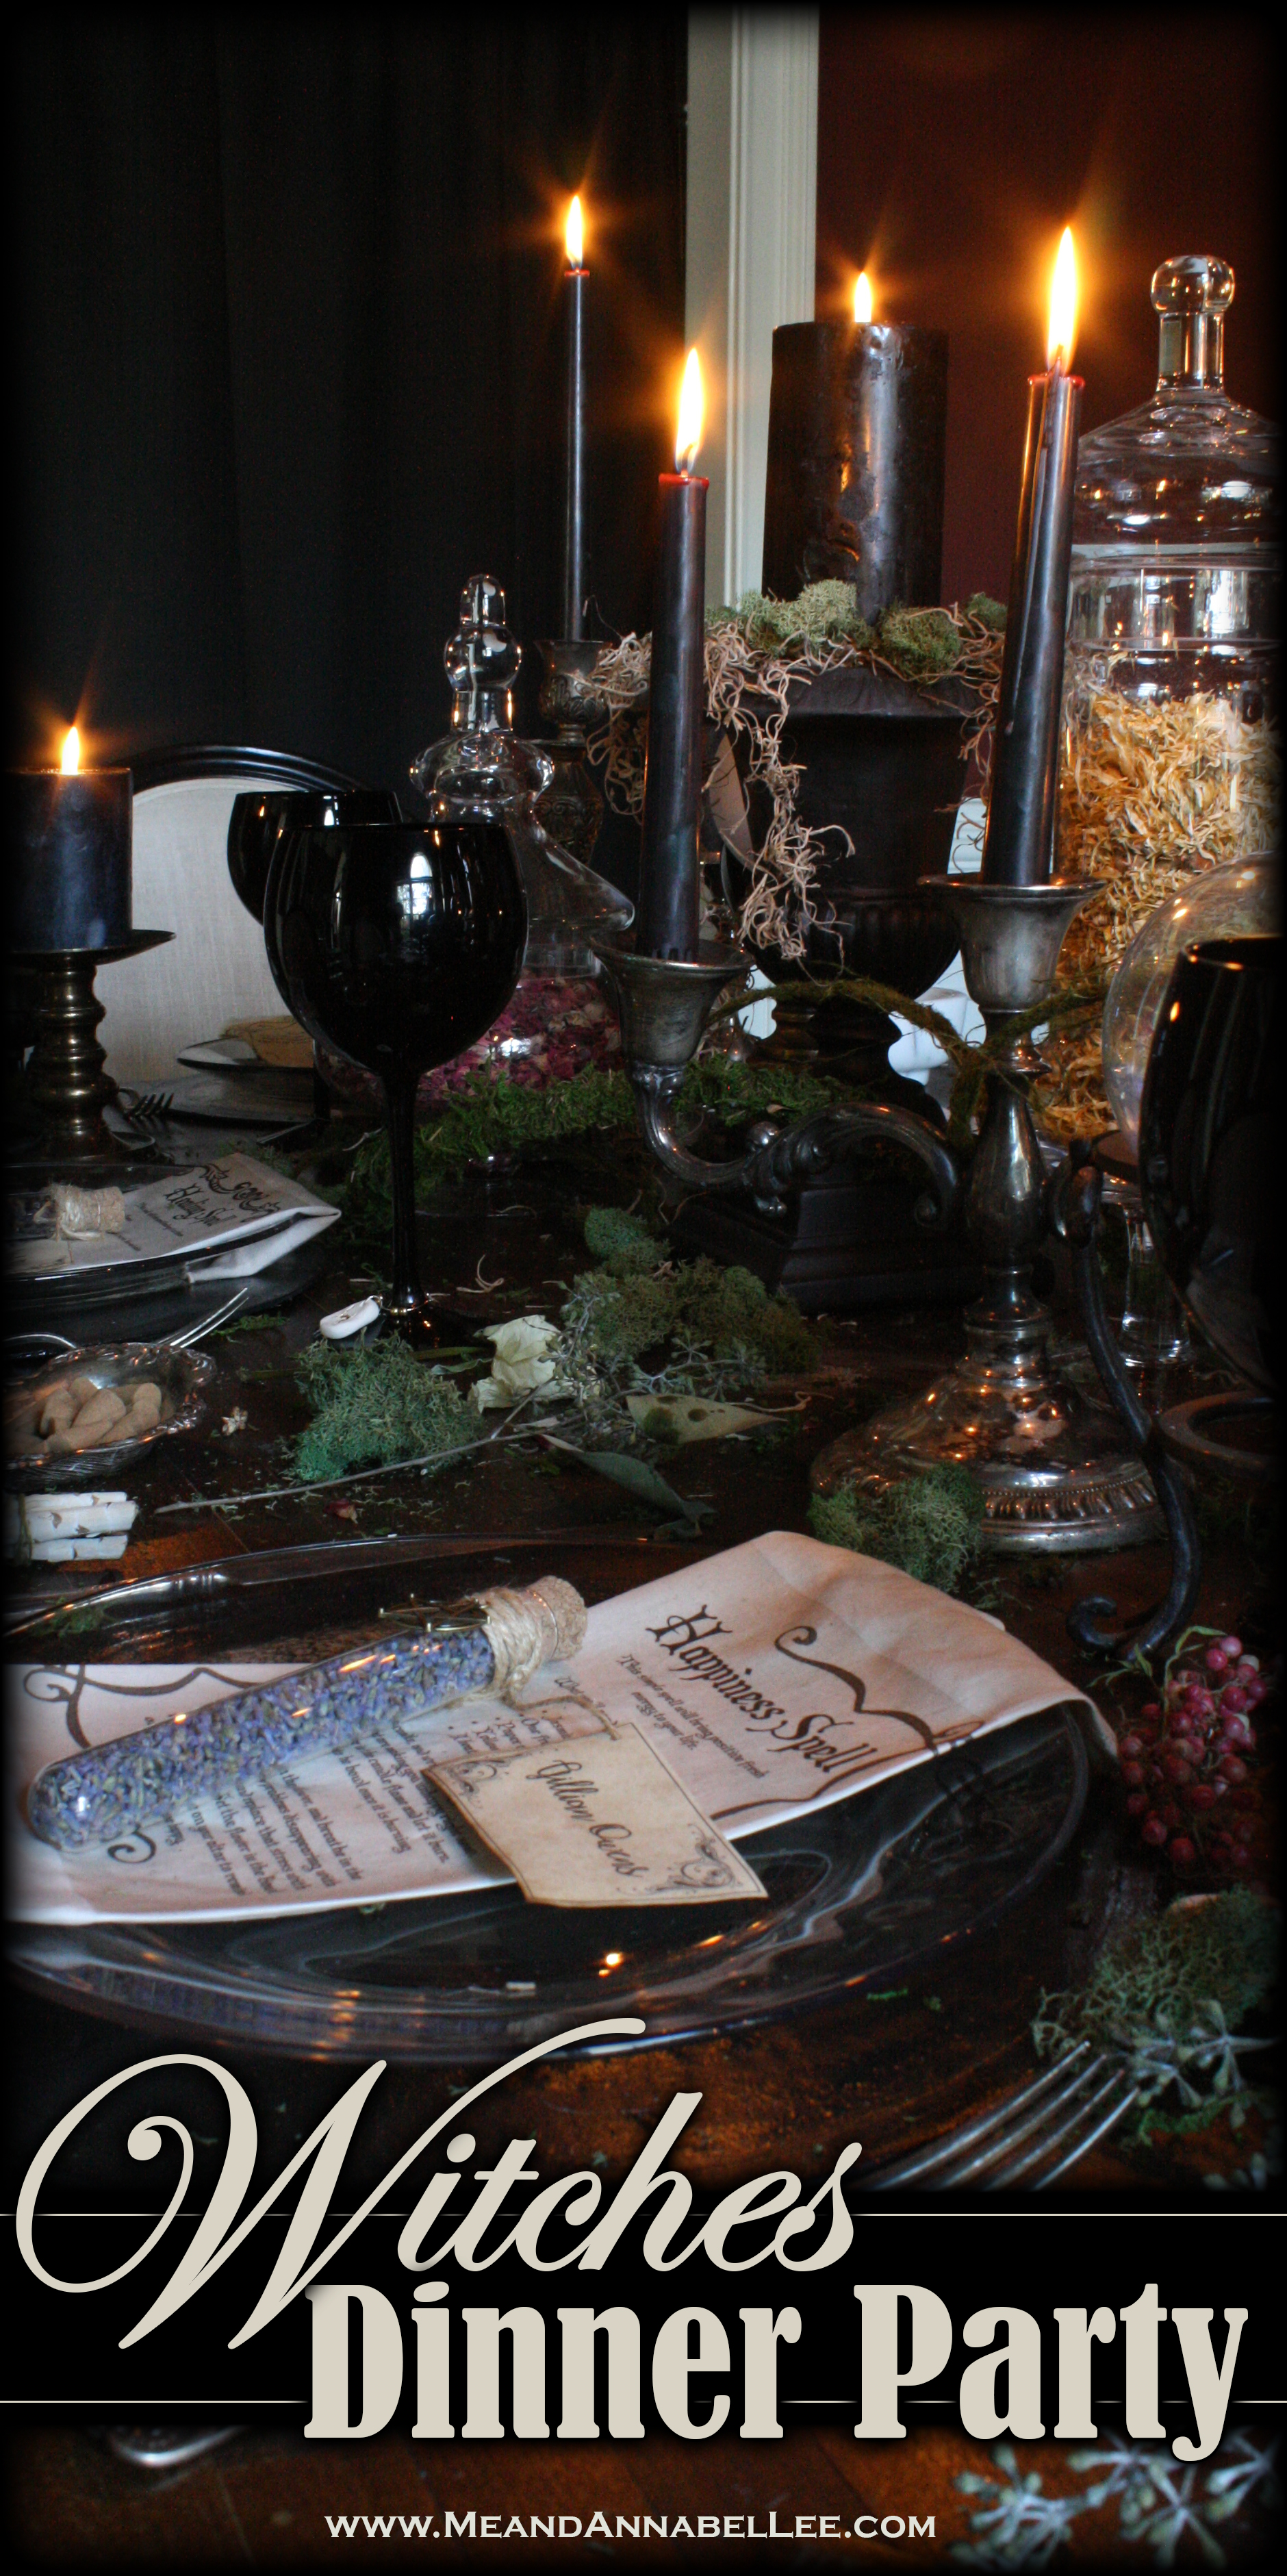 Witches Dinner Party | Elegant Gothic Halloween Table Decor | Candlelit Dinner | Dark & Moody Ambience |Crystal Balls | Apothecary Jars | Spell Napkins | Rune Stone Wine Charms | Antique Candle Holders | Skull Centerpiece | Black Candles | Enchanted Forest | Goth Home Décor | Samhain Feast Menu | www.MeandAnnabelLee.com